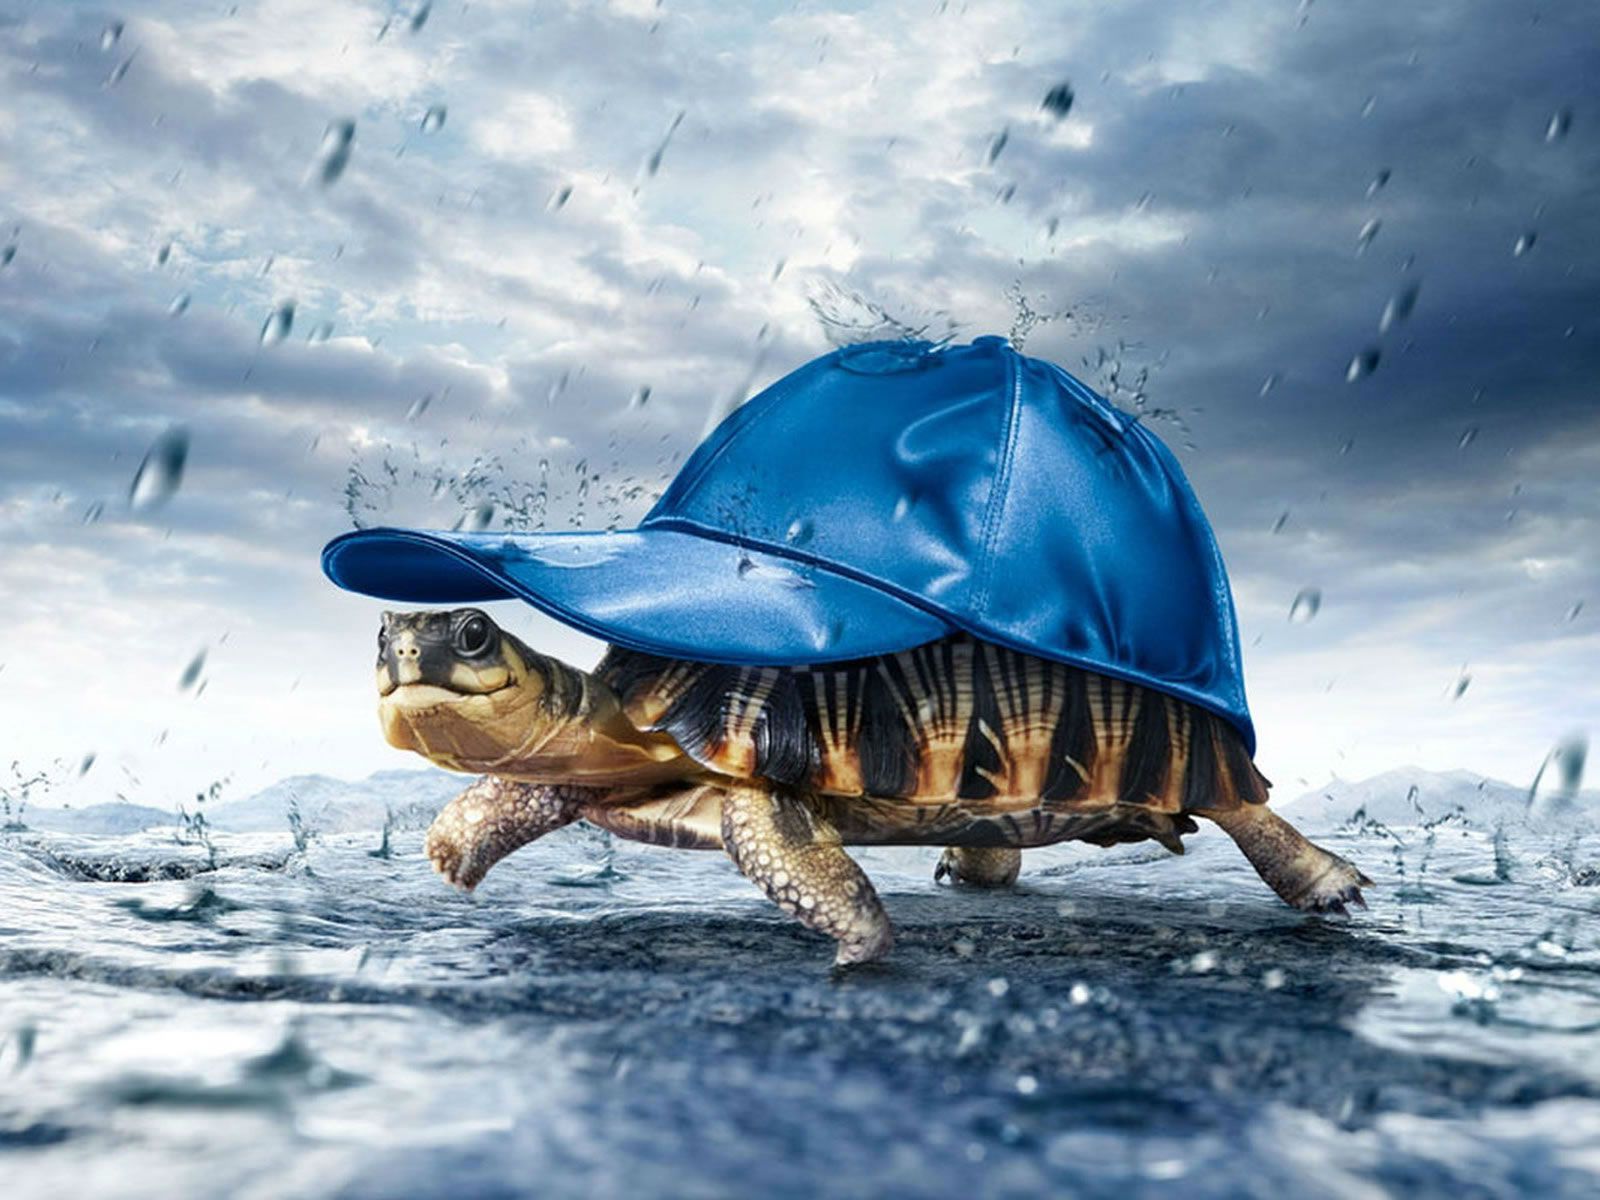 1600x1200 Turtle In The Rain Hd Wallpaper Background Download